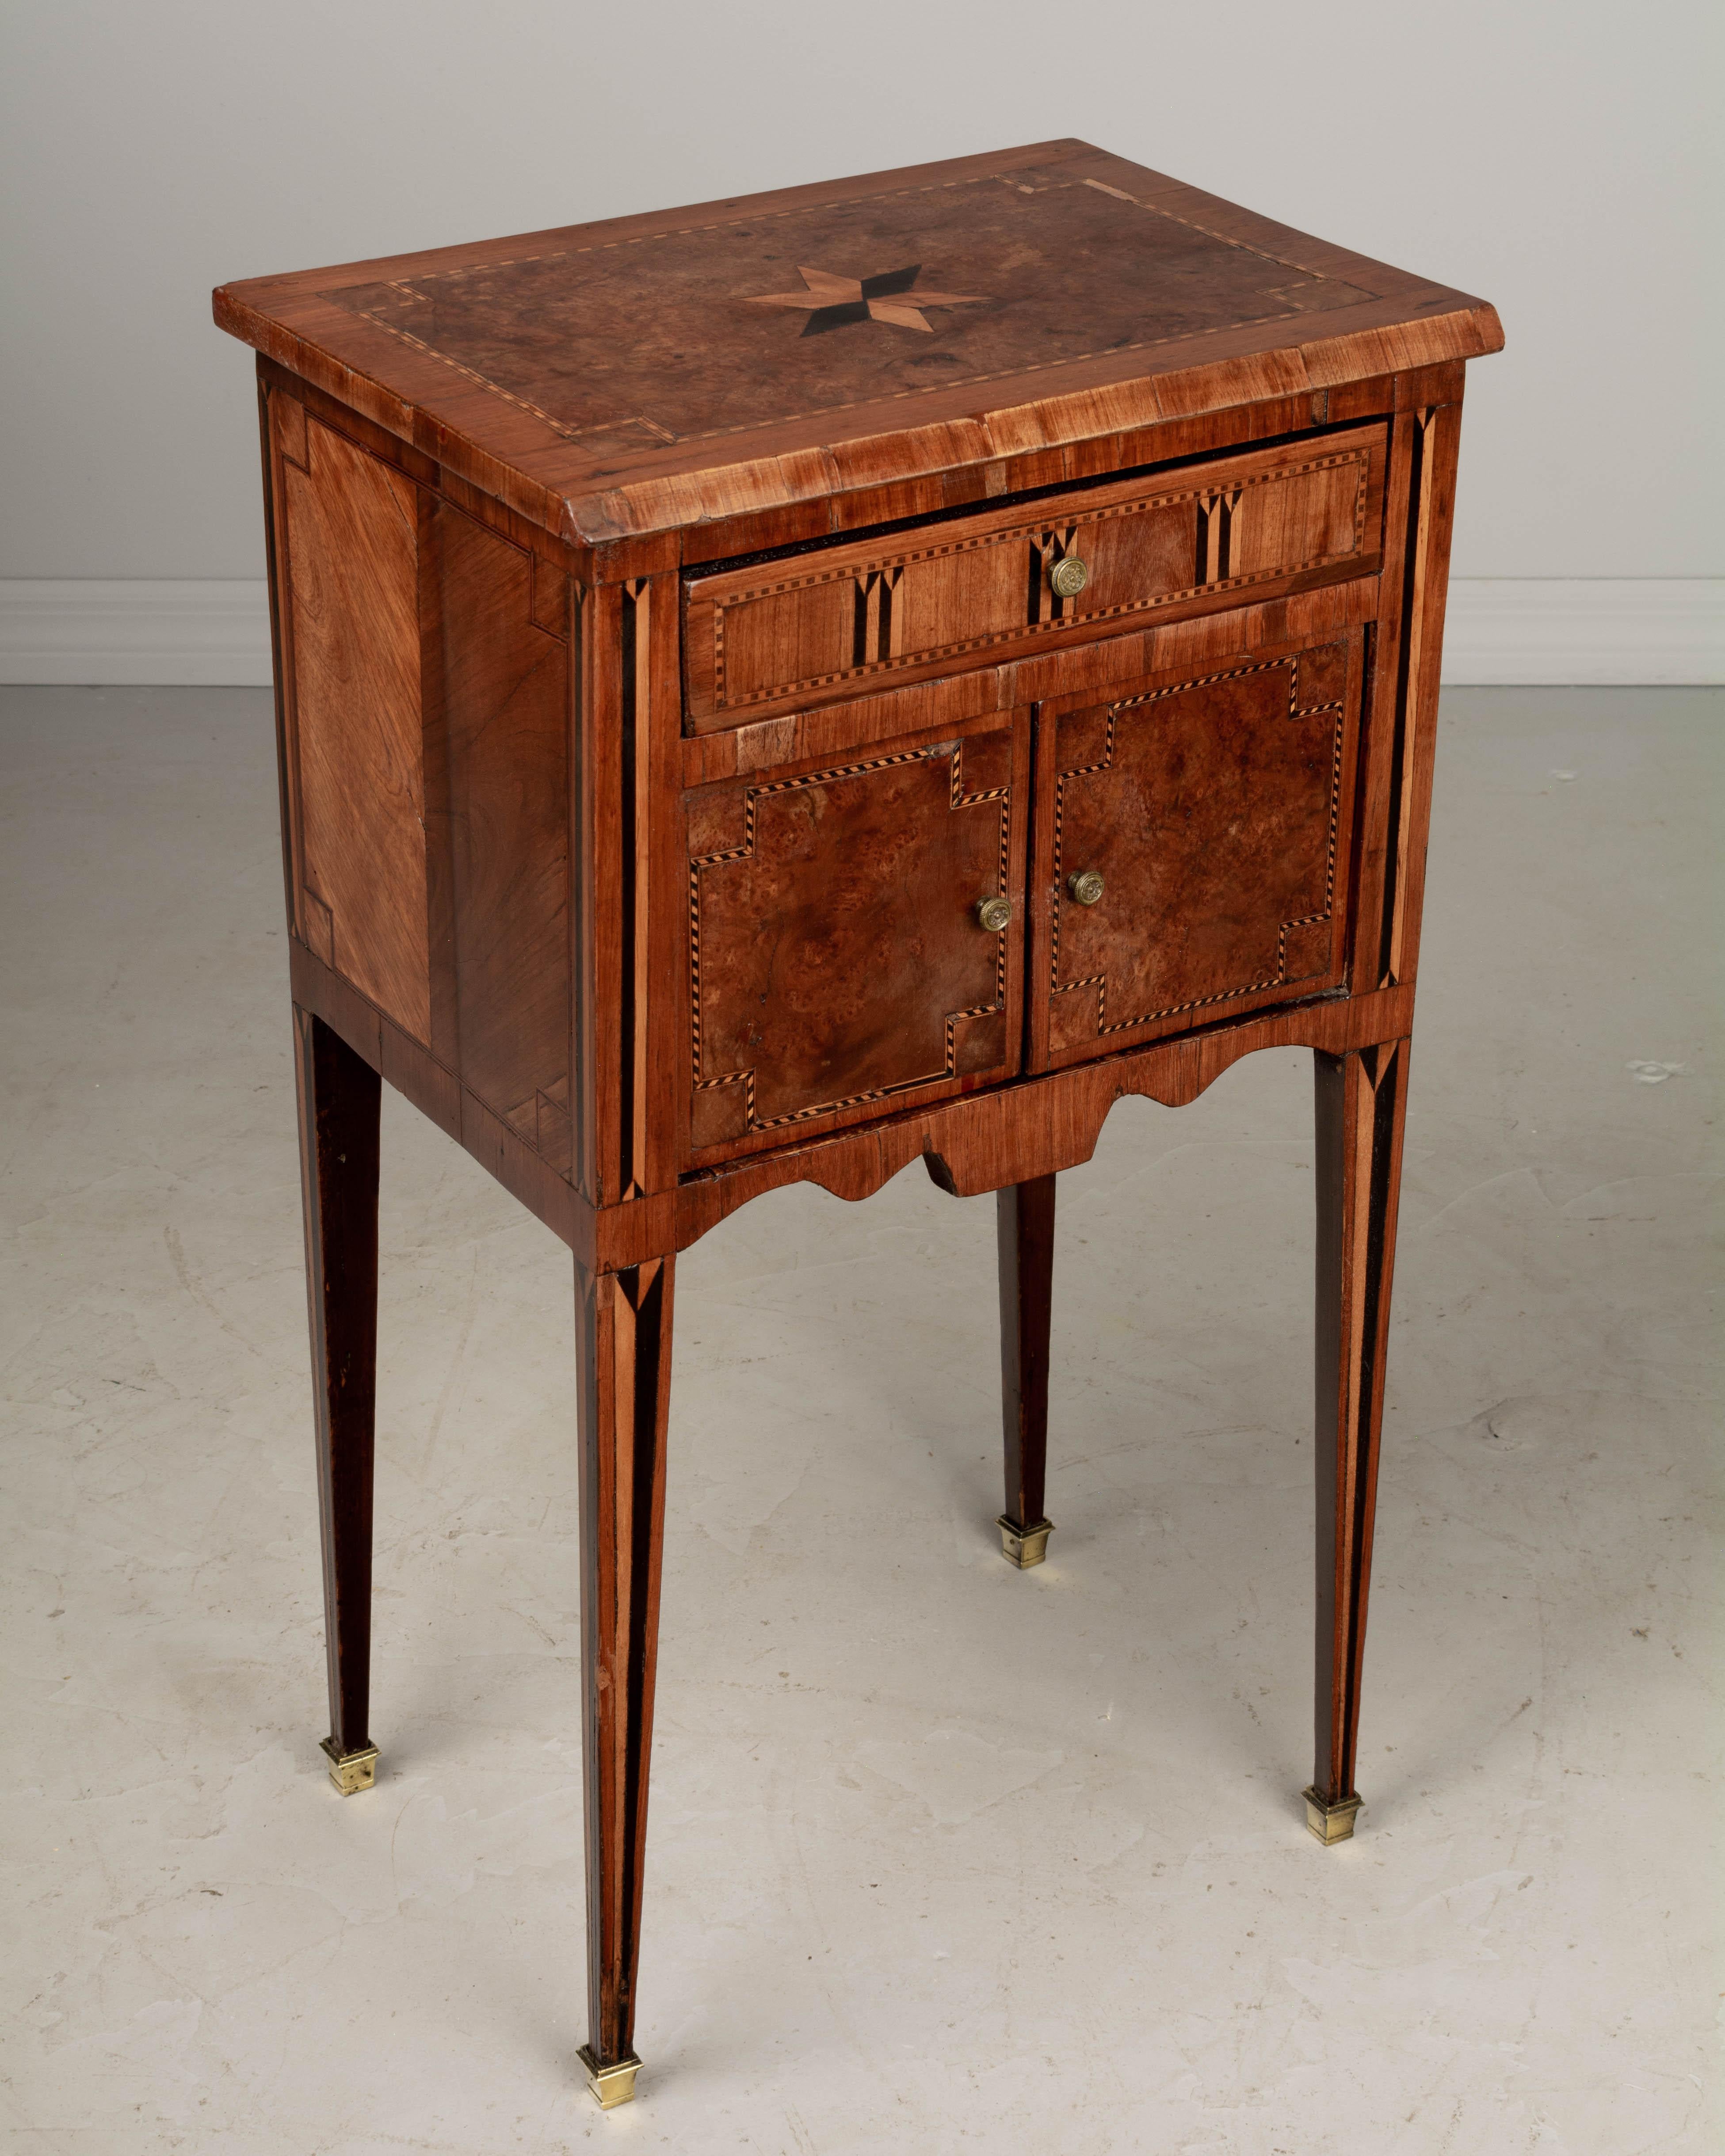 Hand-Crafted 18th Century Louis XVI Style Marquetry Side Table For Sale